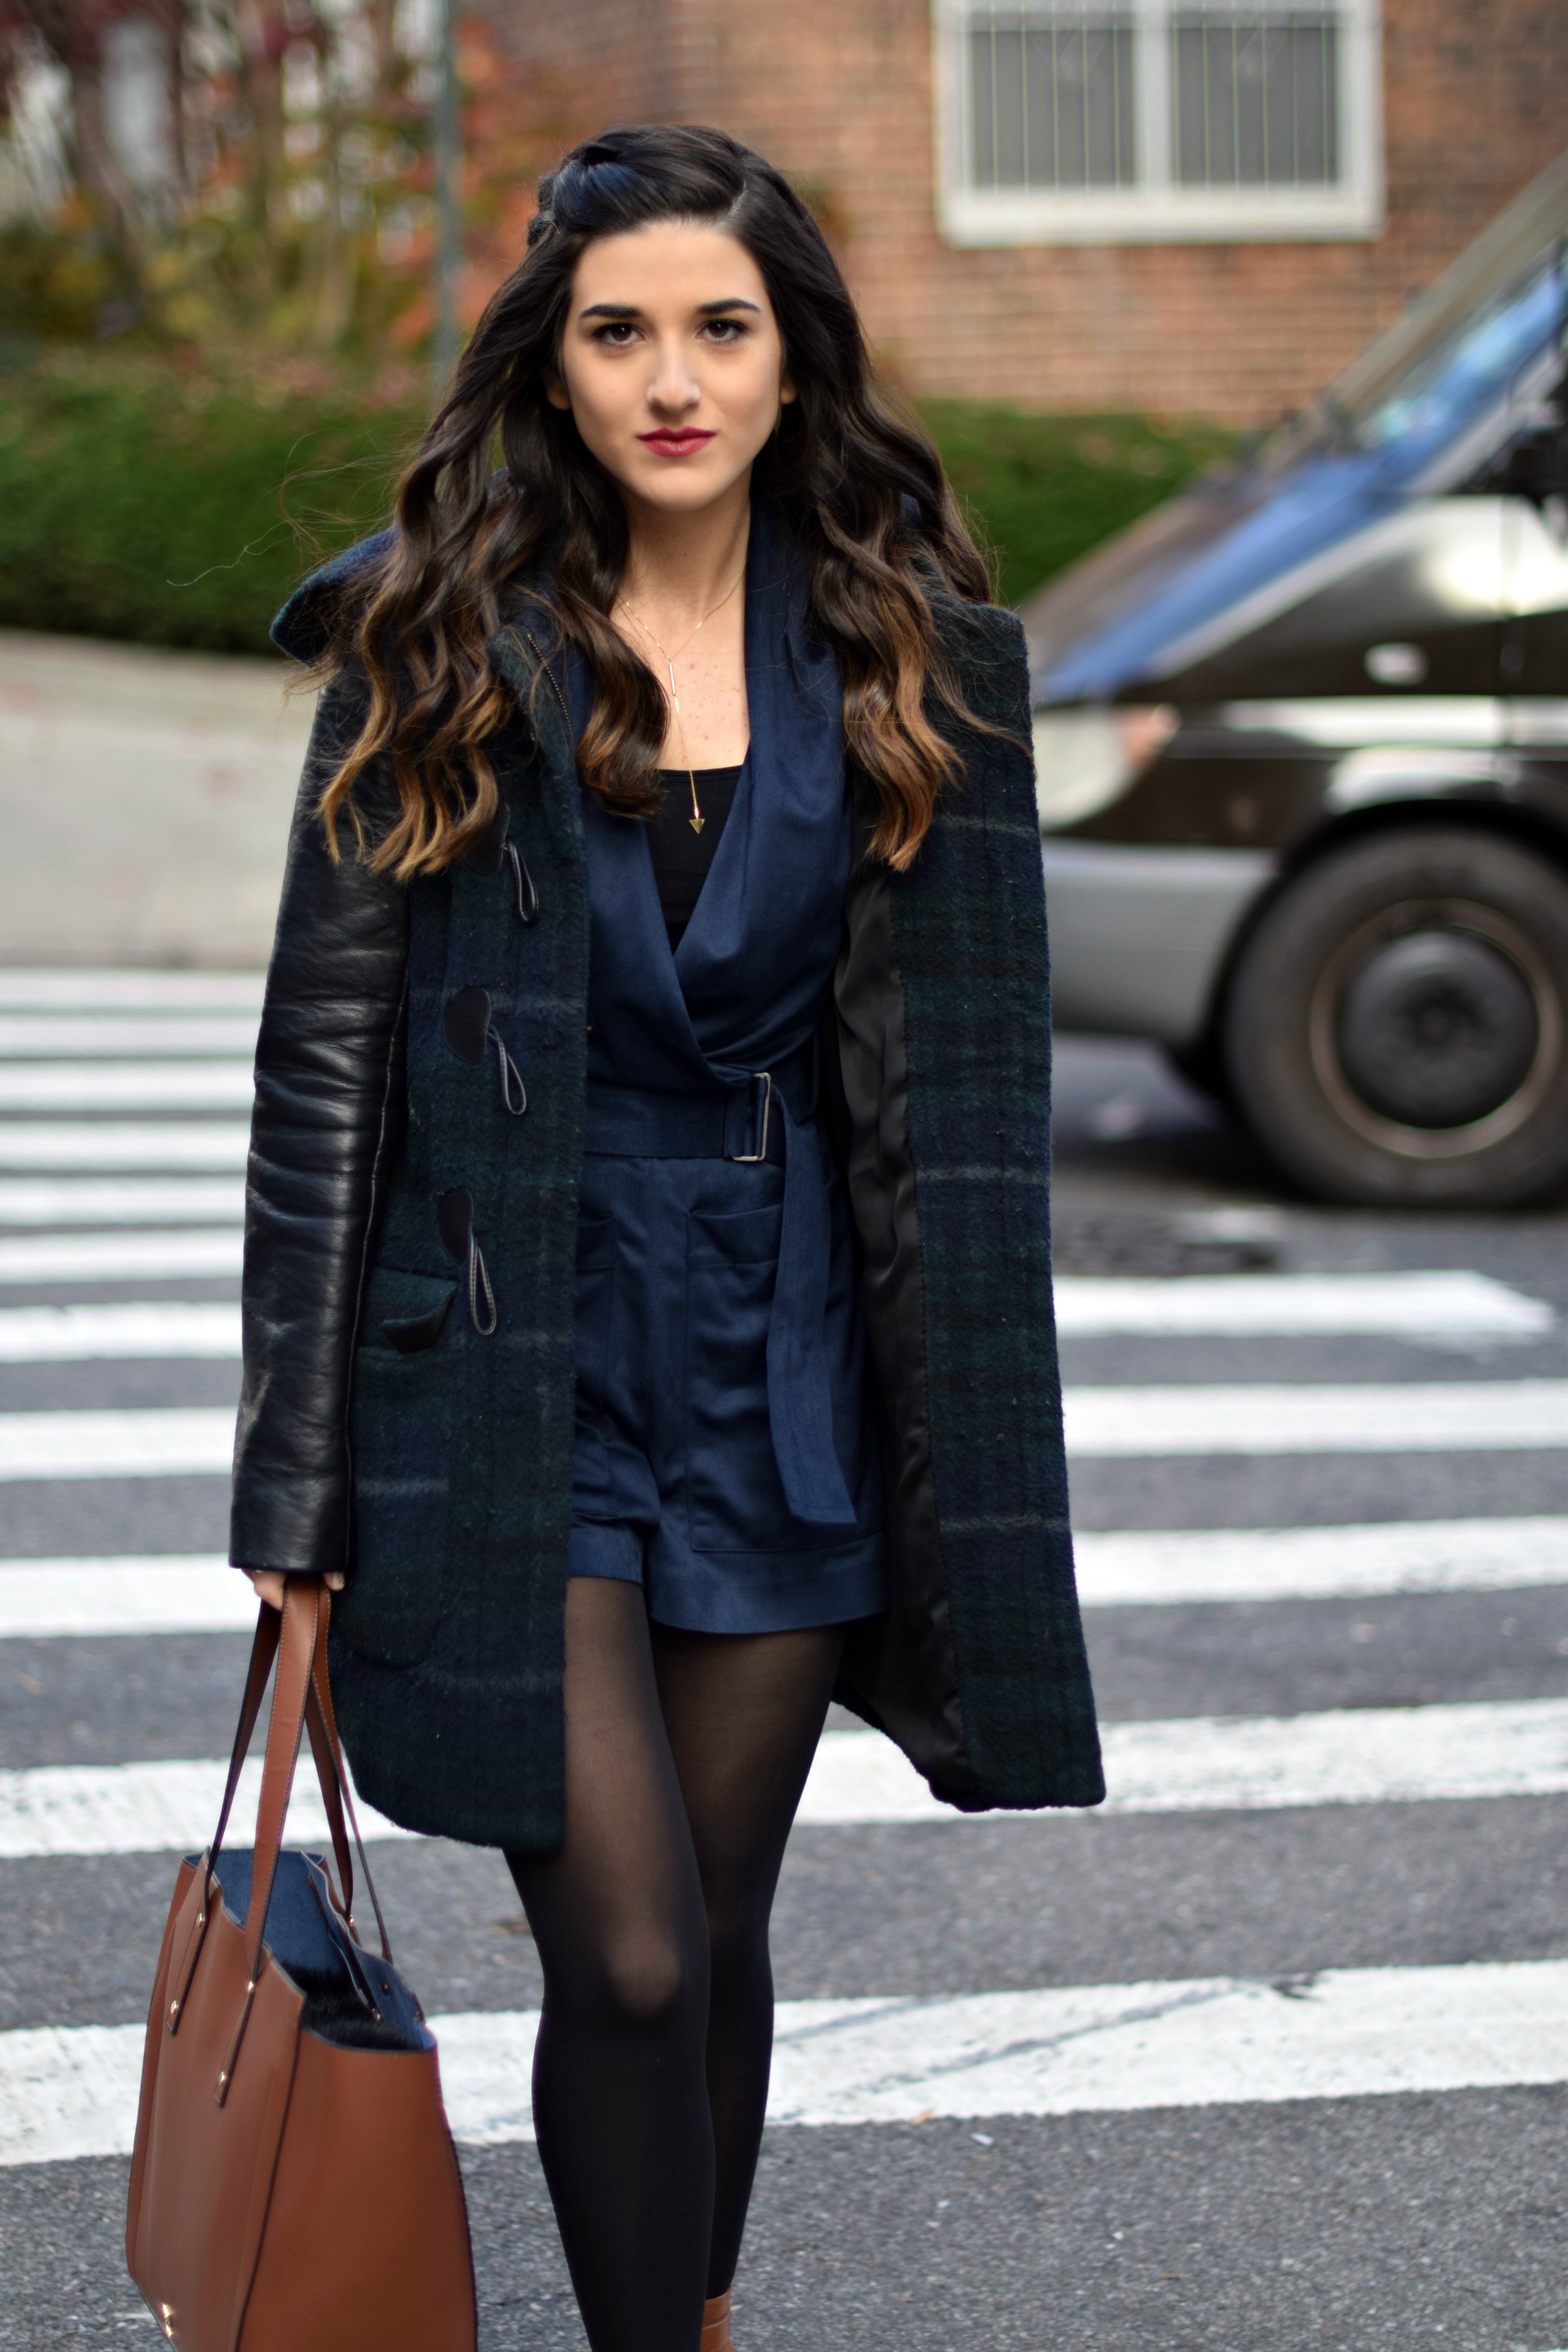 Navy Romper Fringe Booties Louboutins & Love Fashion Blog Esther Santer NYC Street Style Blogger Zara Plaid Coat Leather Sleeves Girl Women OOTD Outfit Accessories Soho Tote Ivanka Trump Black Tights Shoes Boots Winter Hair Braid Inspo Rings Jewelry.jpg